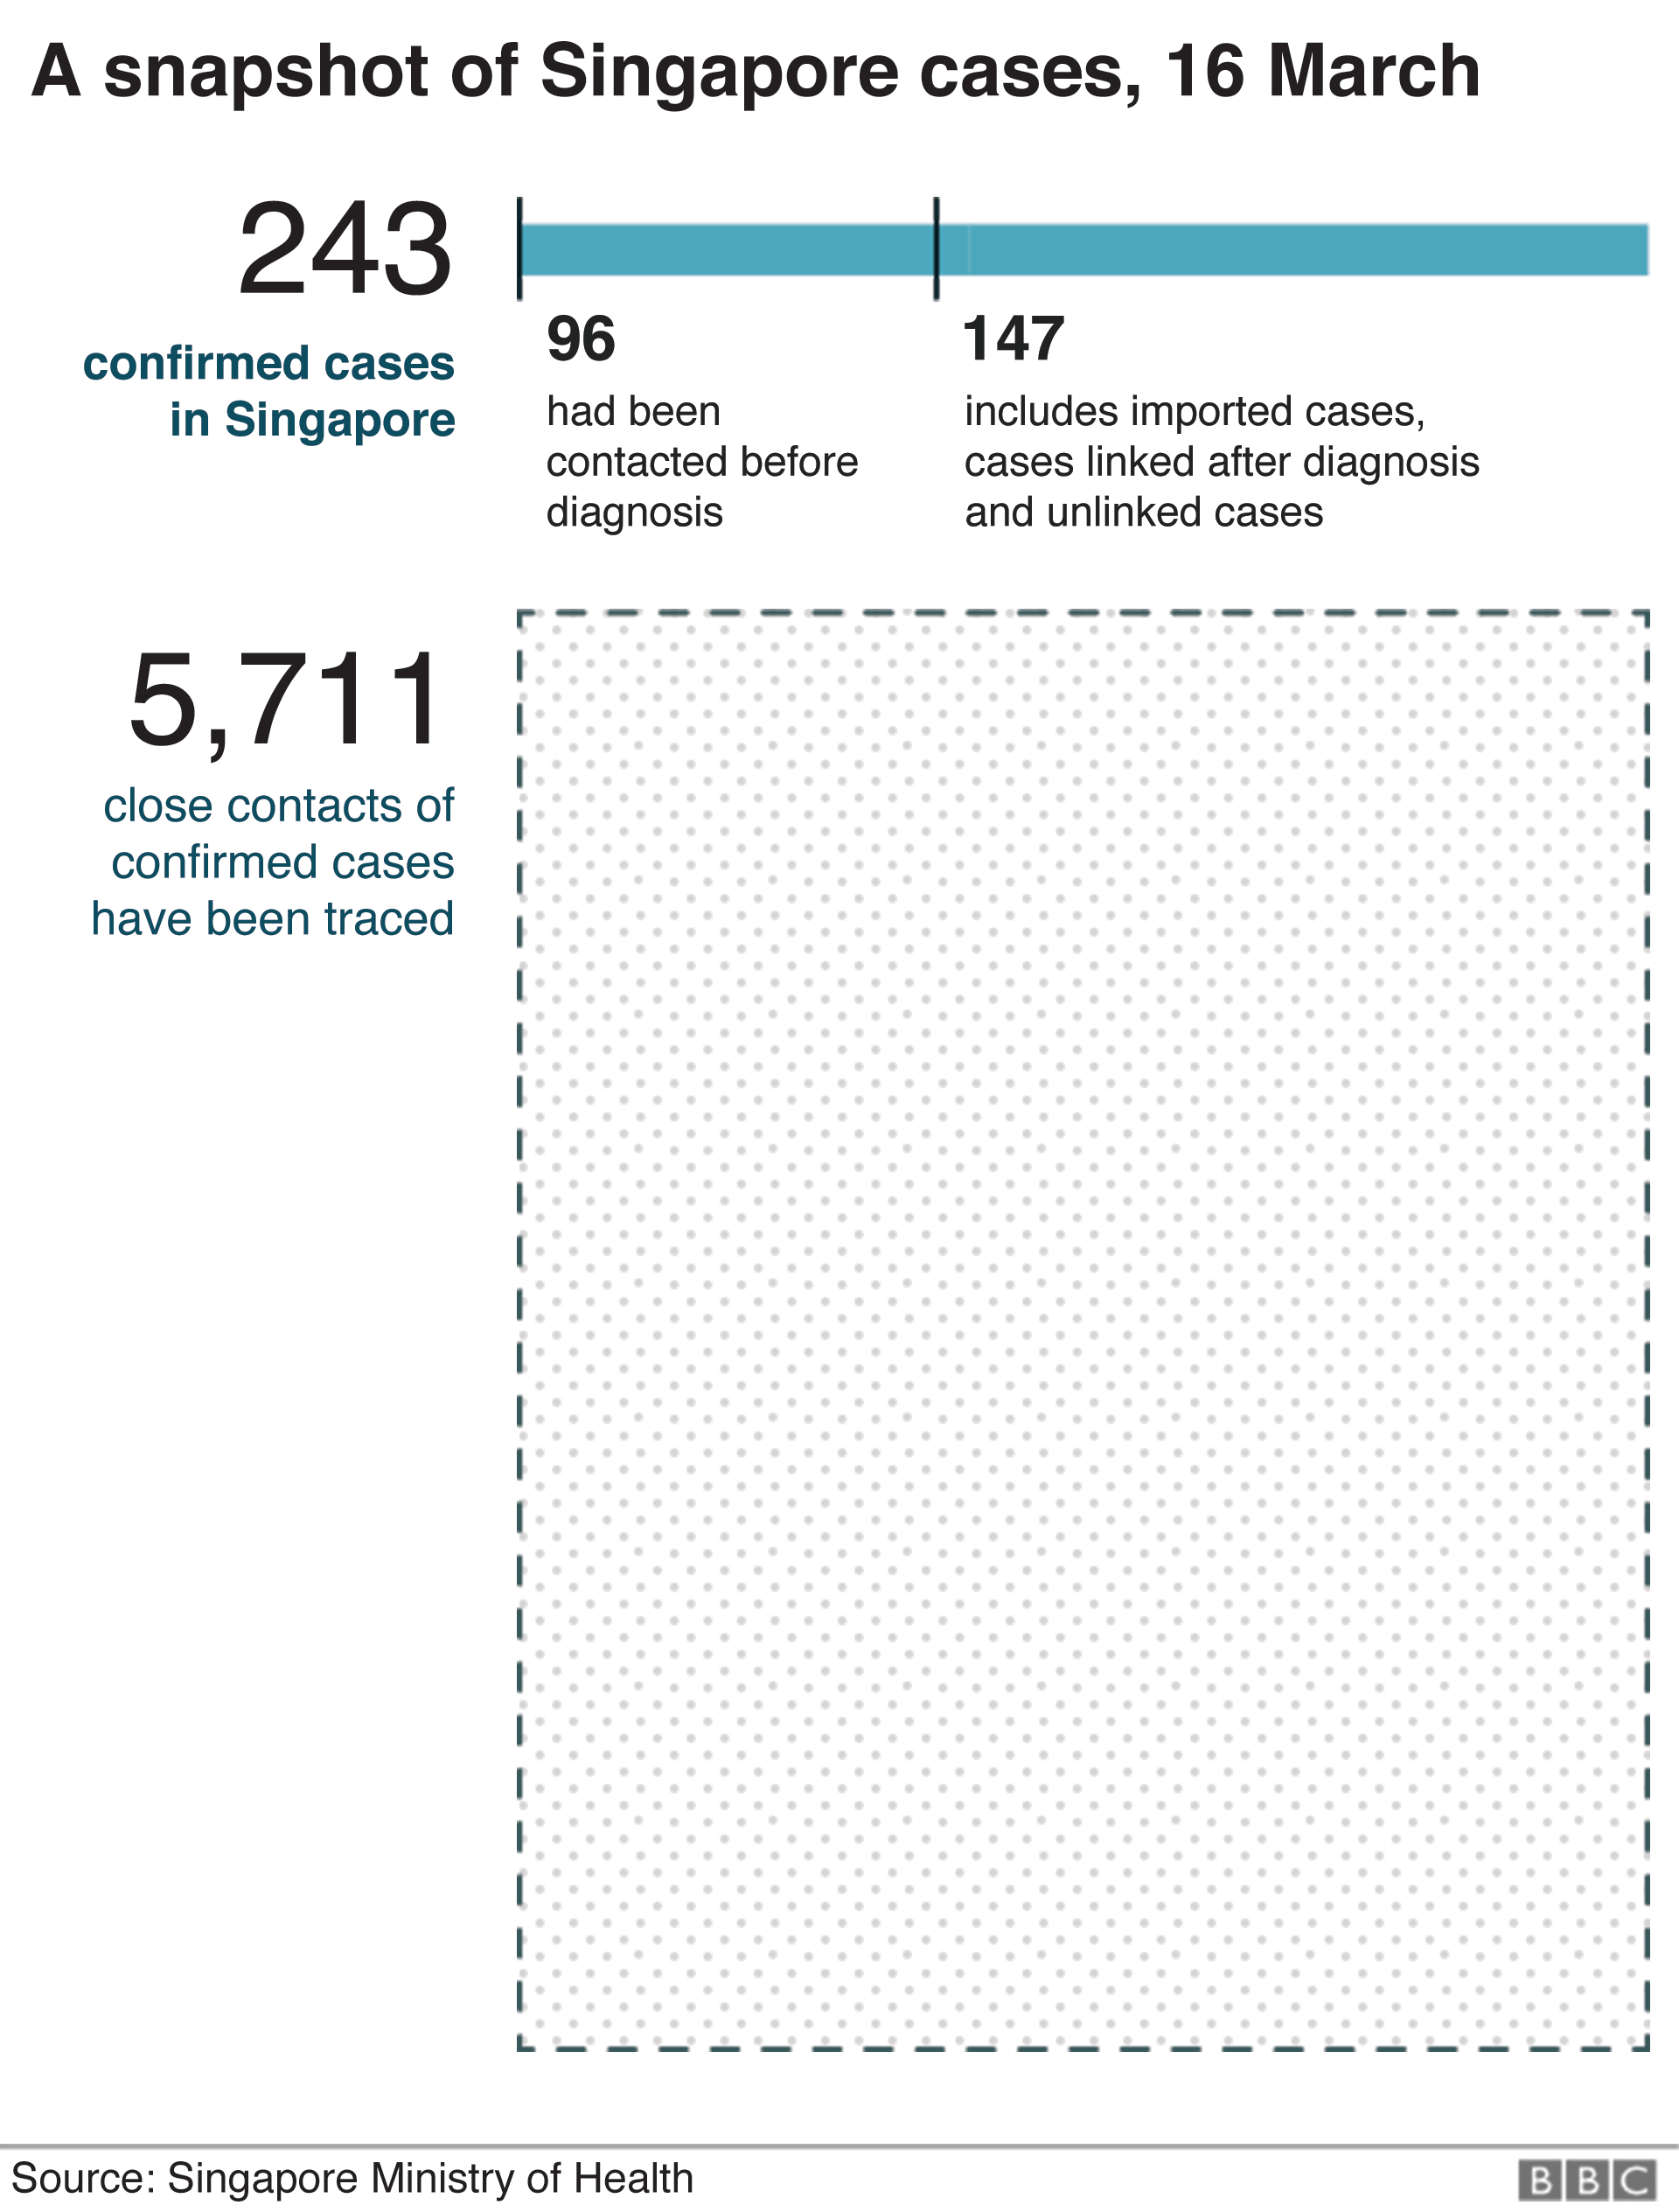 Graphic shows 5,711 people were traced from 243 confirmed cases